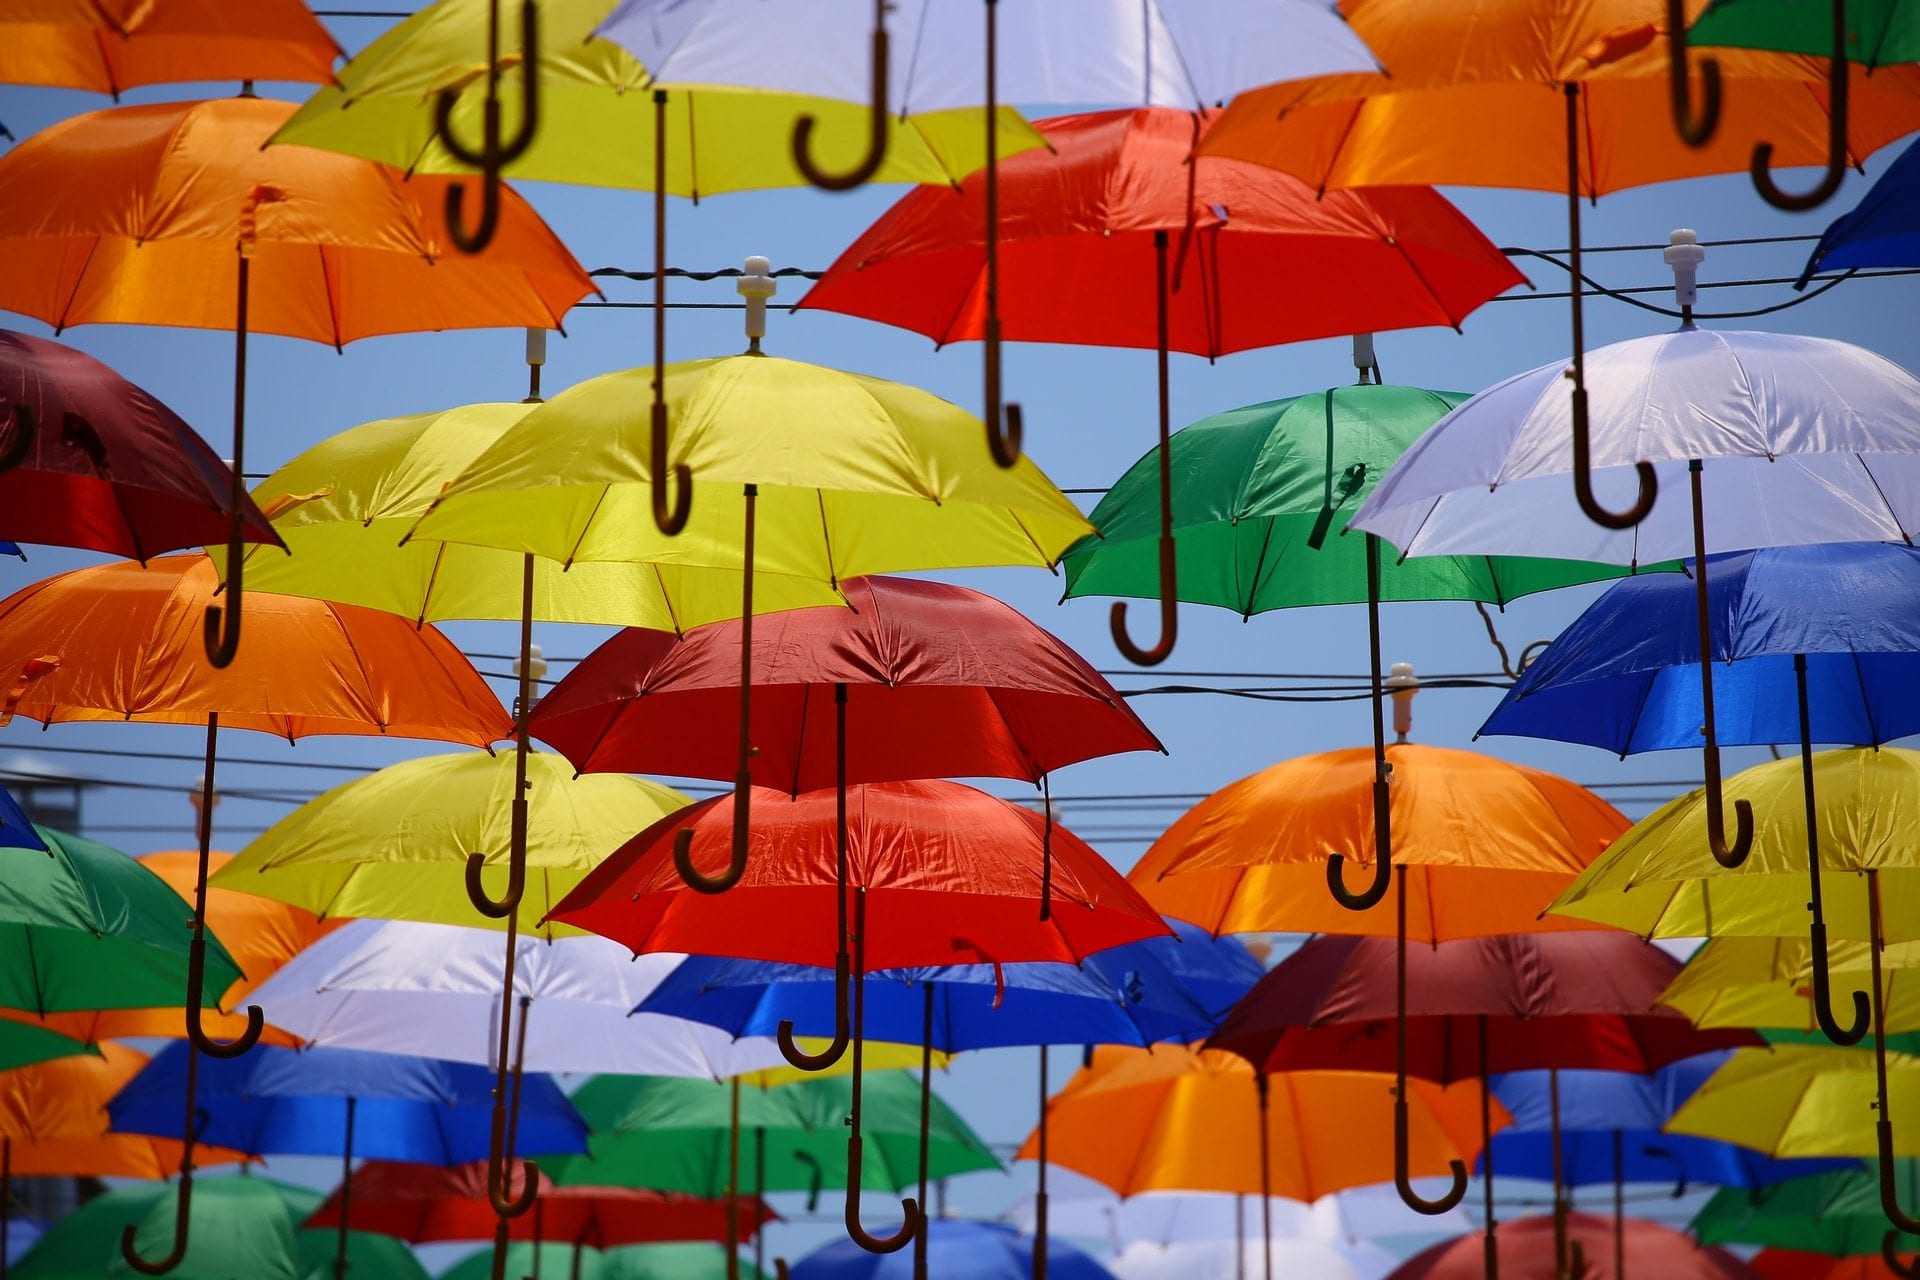 lots of different brightly coloured umbrellas opened against a blue sky